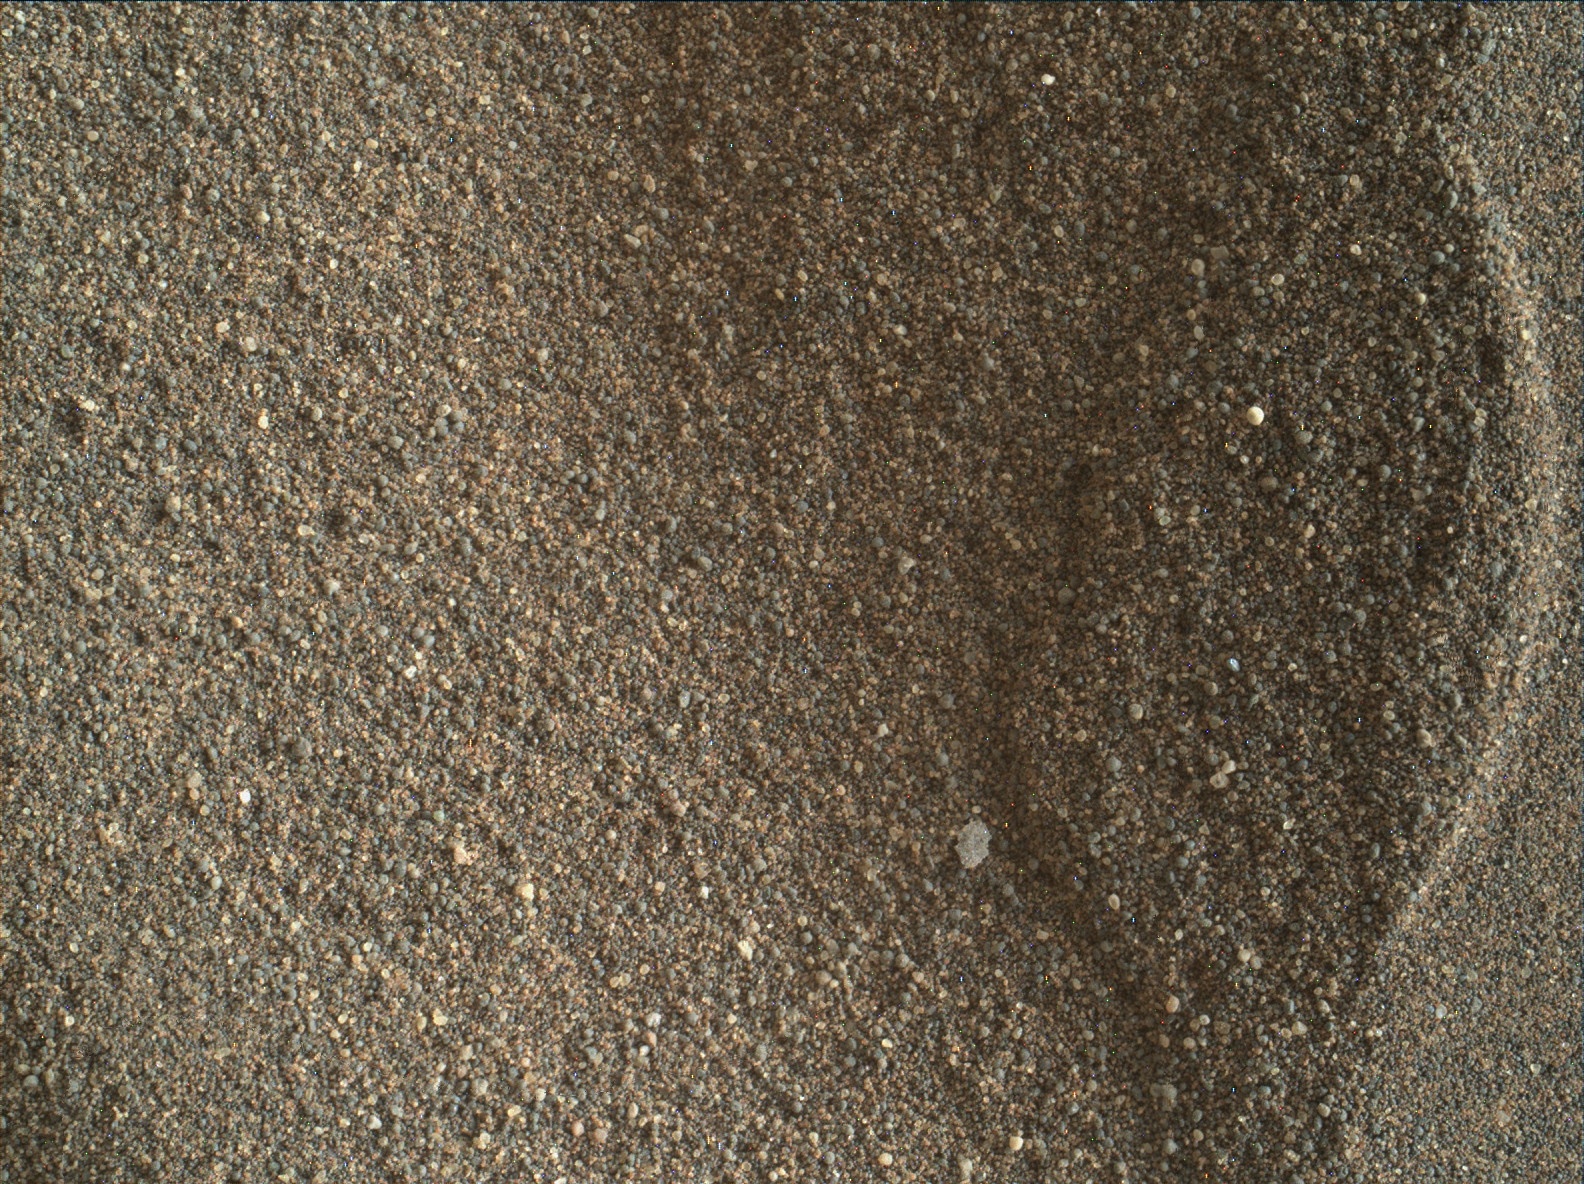 Nasa's Mars rover Curiosity acquired this image using its Mars Hand Lens Imager (MAHLI) on Sol 1903